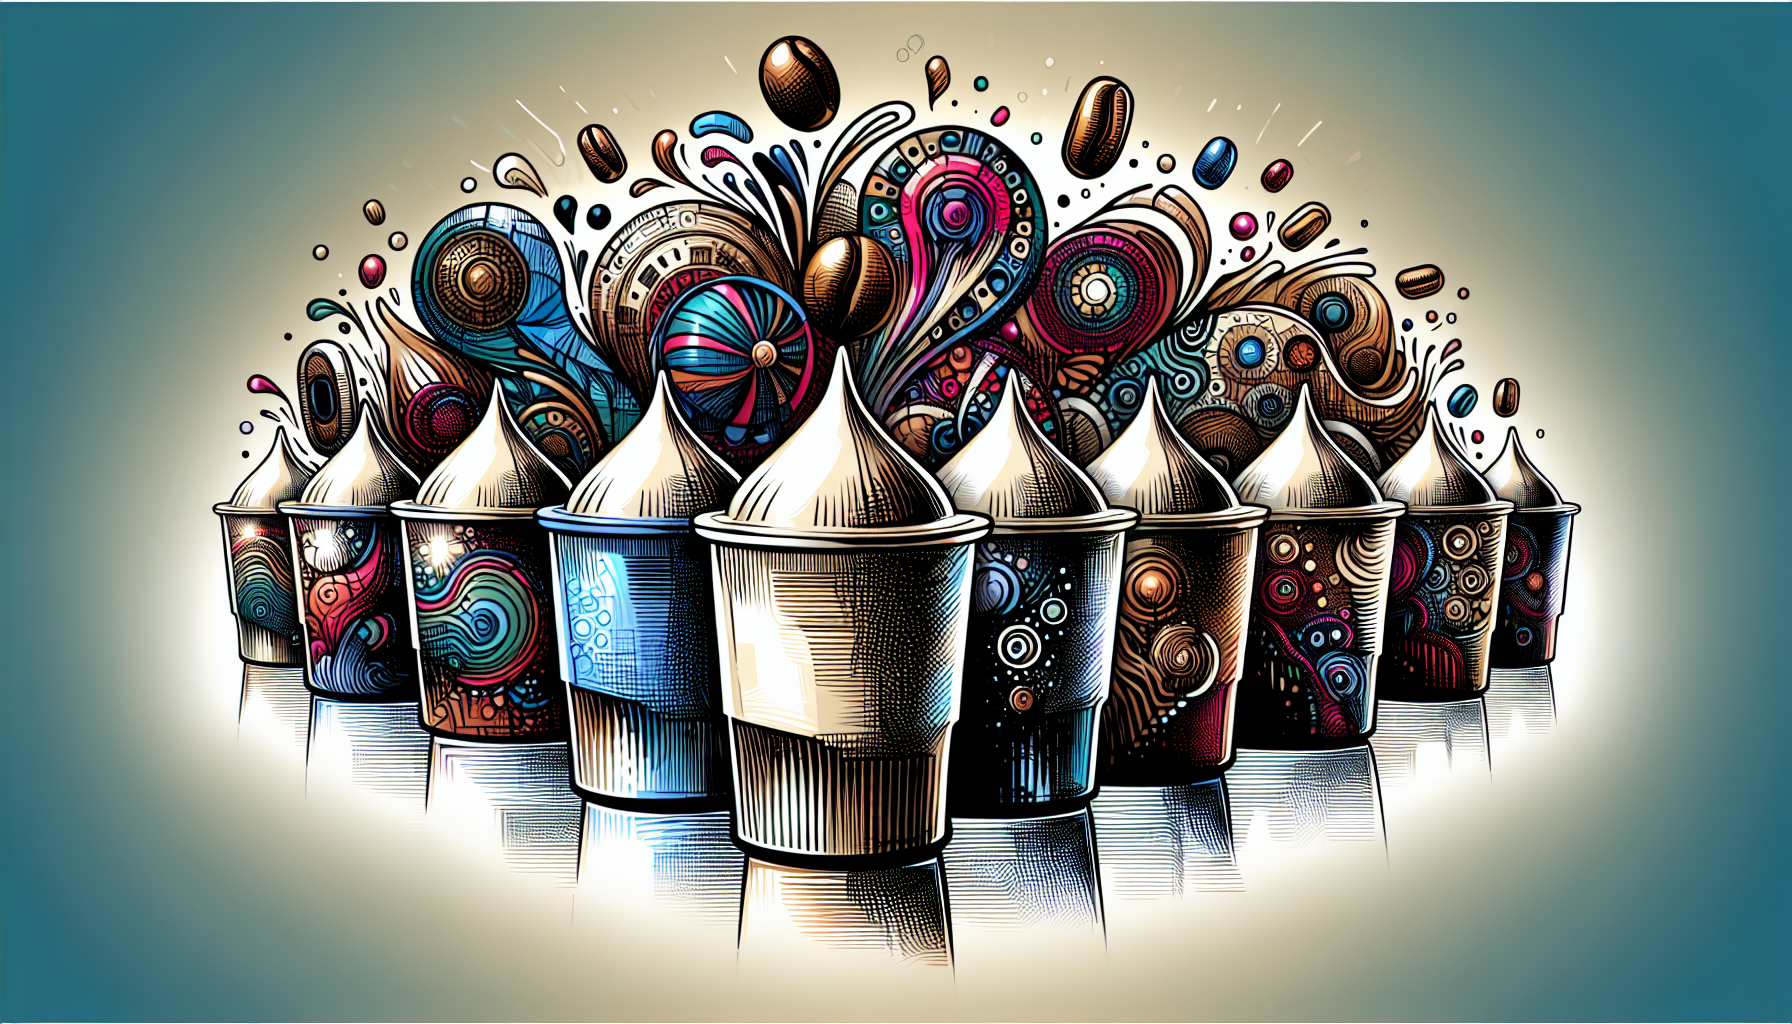 Illustration of customized coffee pods and bags to showcase personalized coffee products for fundraising